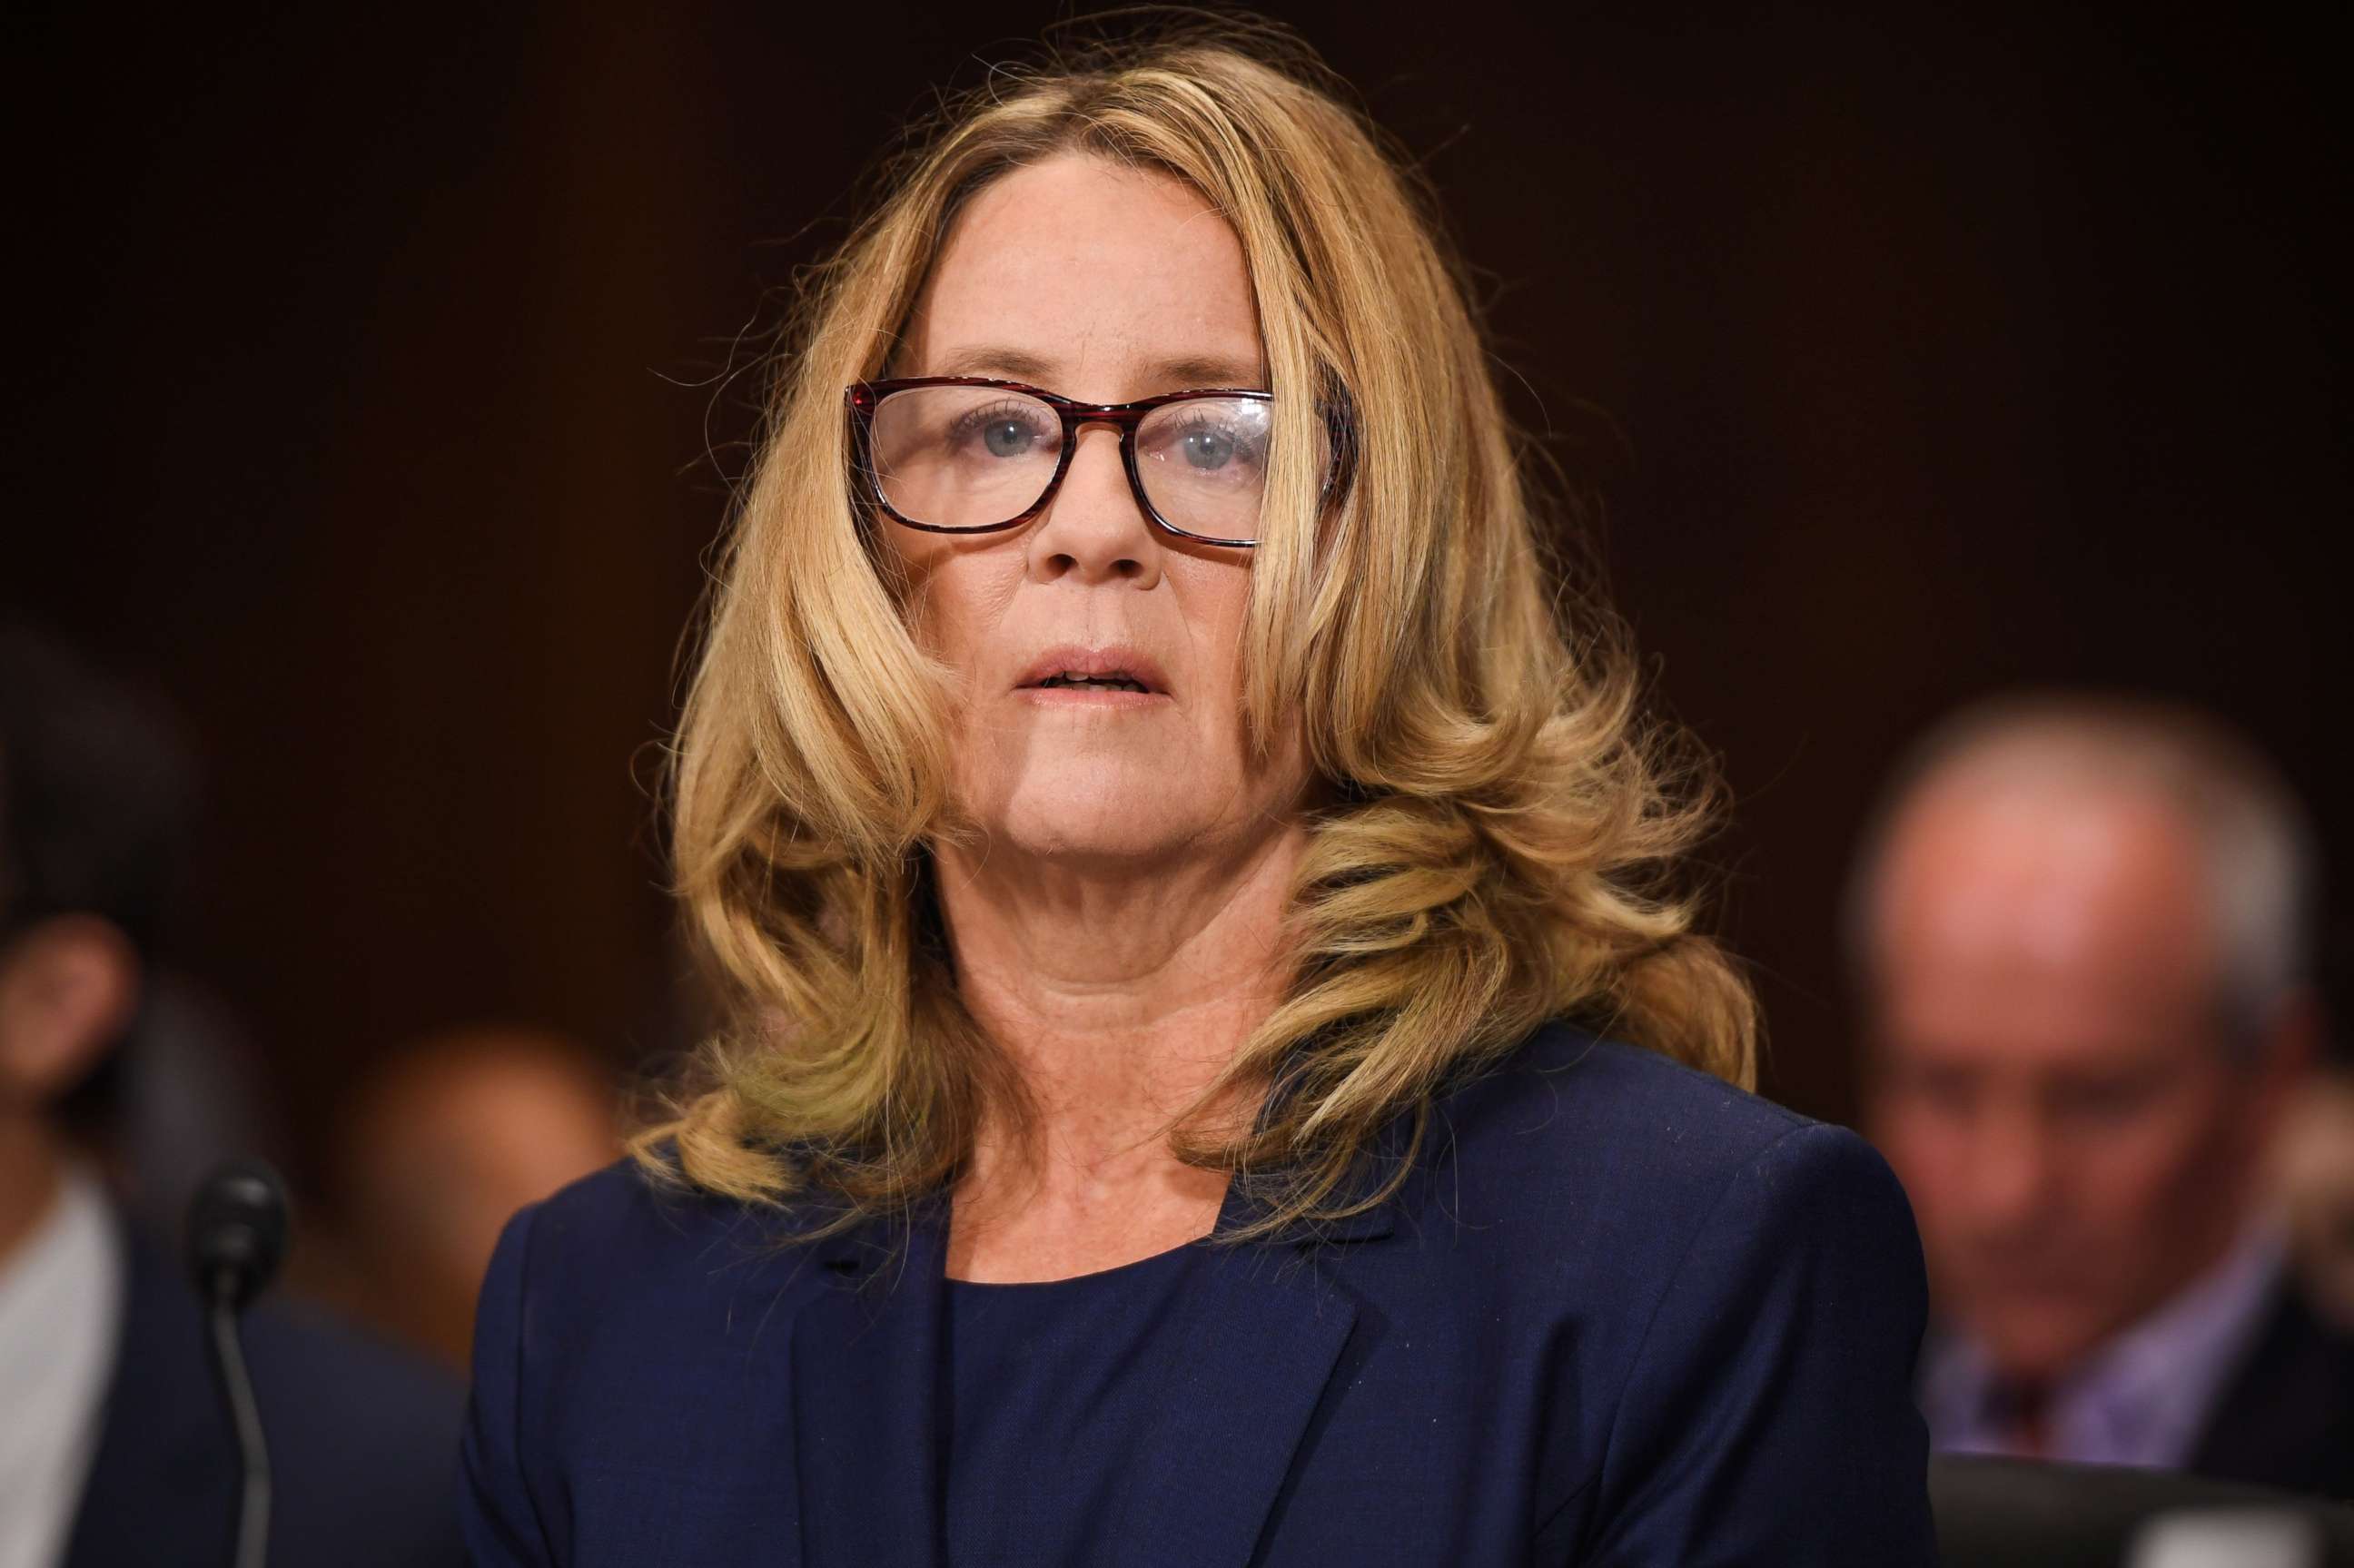 PHOTO: Christine Blasey Ford, the woman accusing Supreme Court nominee Brett Kavanaugh of sexually assaulting her at a party 36 years ago, testifies during his U.S. Senate Judiciary Committee confirmation hearing in Washington, Sept. 27, 2018.